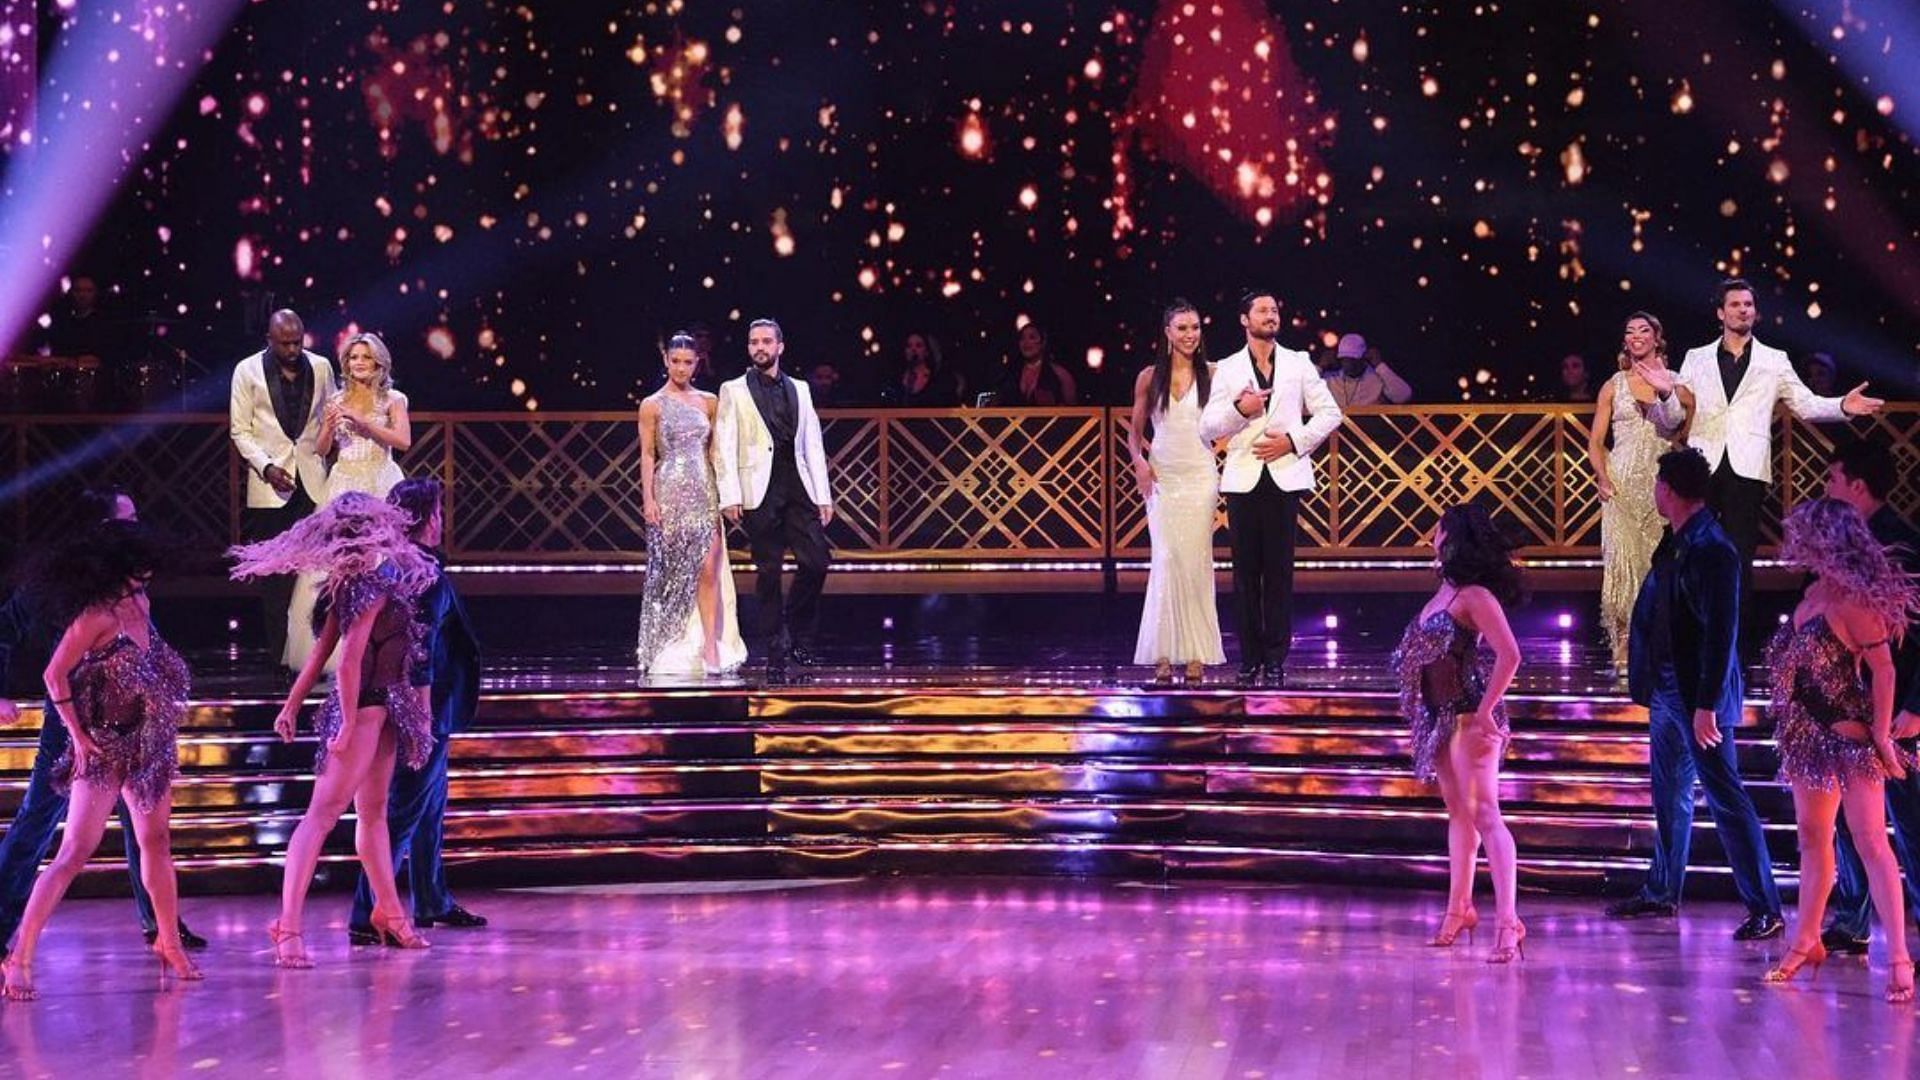 DWTS season 31 aired its finale episode this week